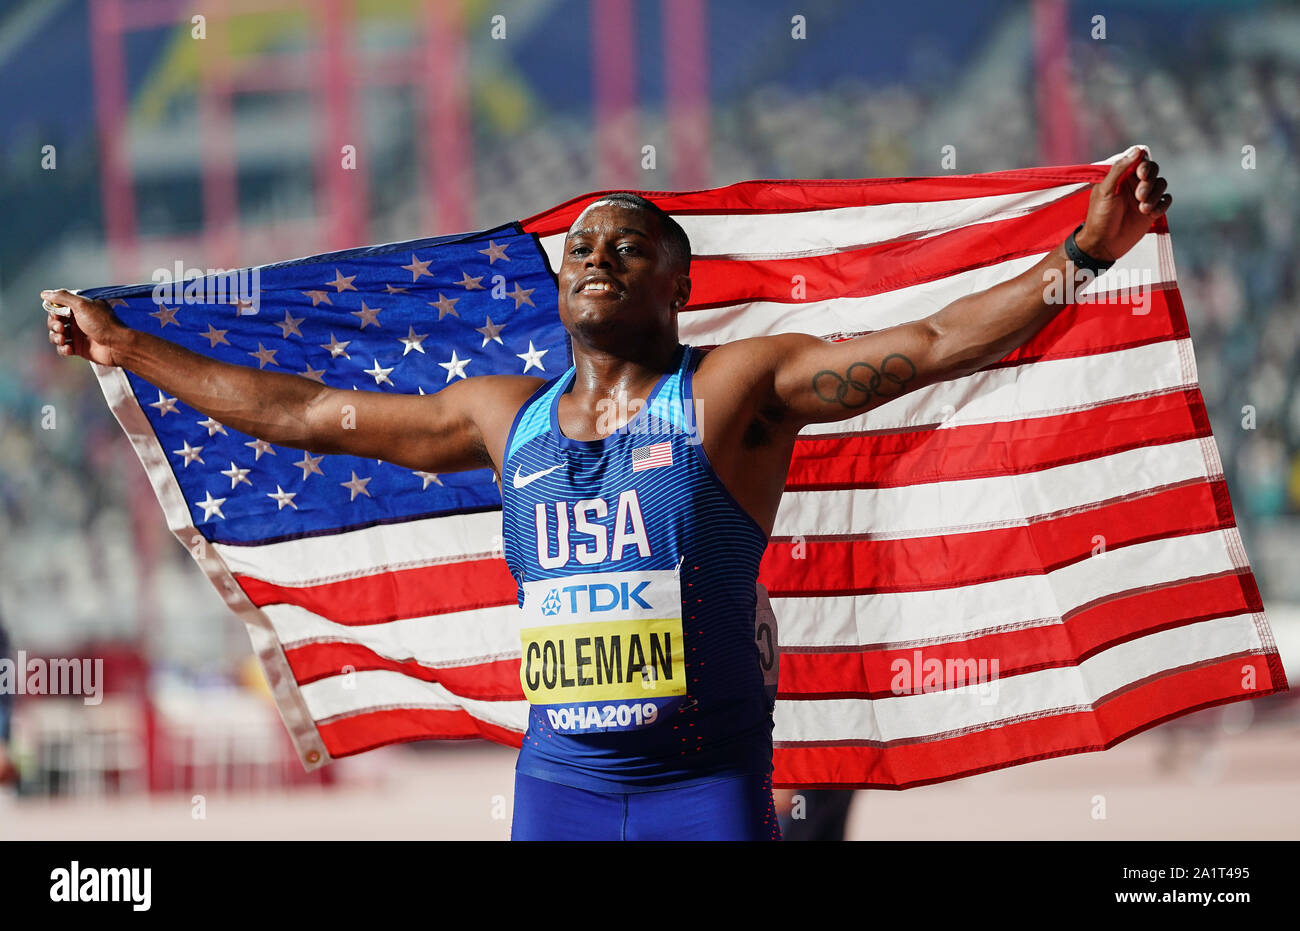 Doha, Qatar. 28th Sep, 2019. Christian Coleman of United States after winning in the 100 meter for men during the 17th IAAF World Athletics Championships at the Khalifa Stadium in Doha, Qatar. Ulrik Pedersen/CSM/Alamy Live News Stock Photo